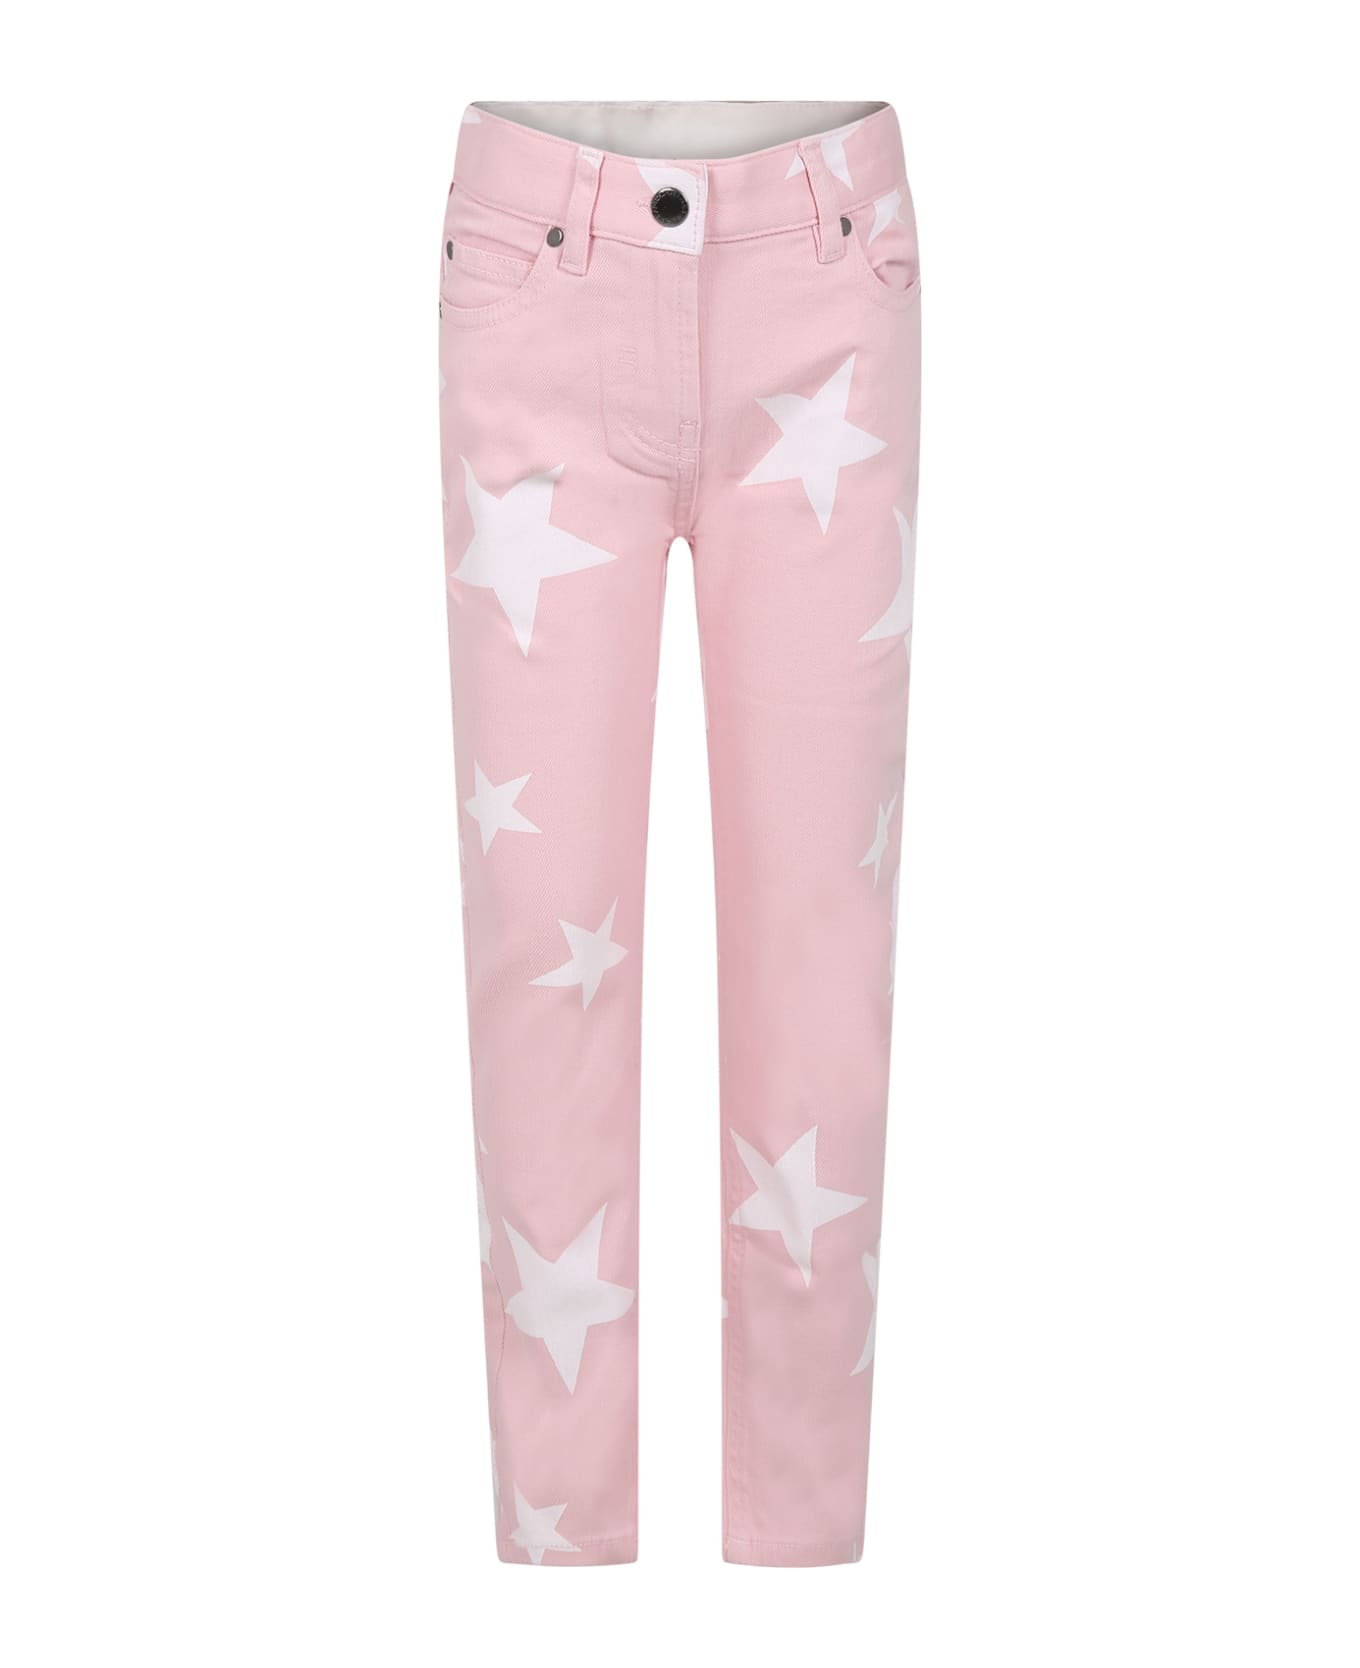 Stella McCartney Kids Pink Jeans For Girl With Stars And Logo - Pink ボトムス